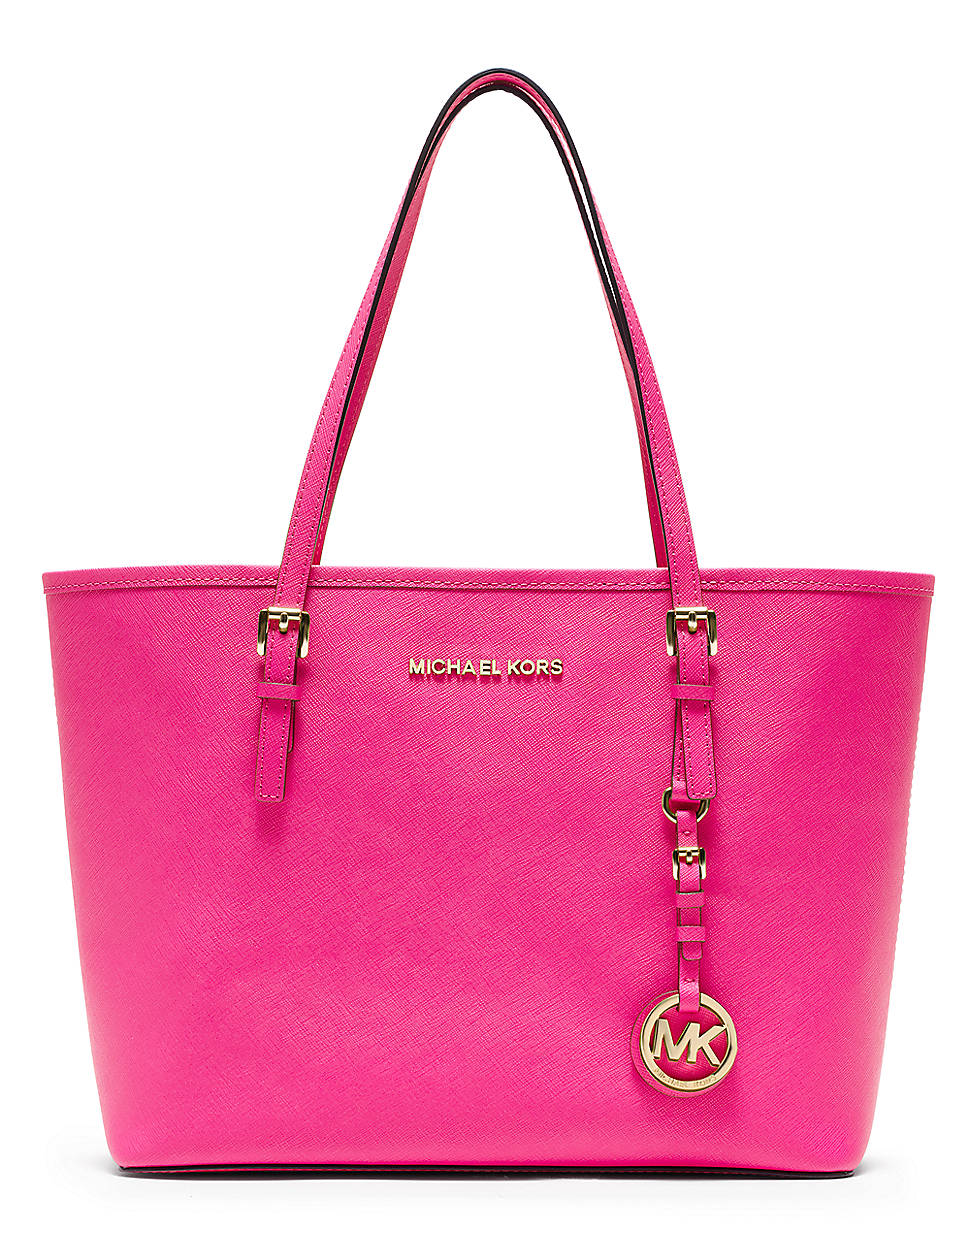 Michael Michael Kors Small Jetset Travel Tote Bag in Pink (neon pink) | Lyst